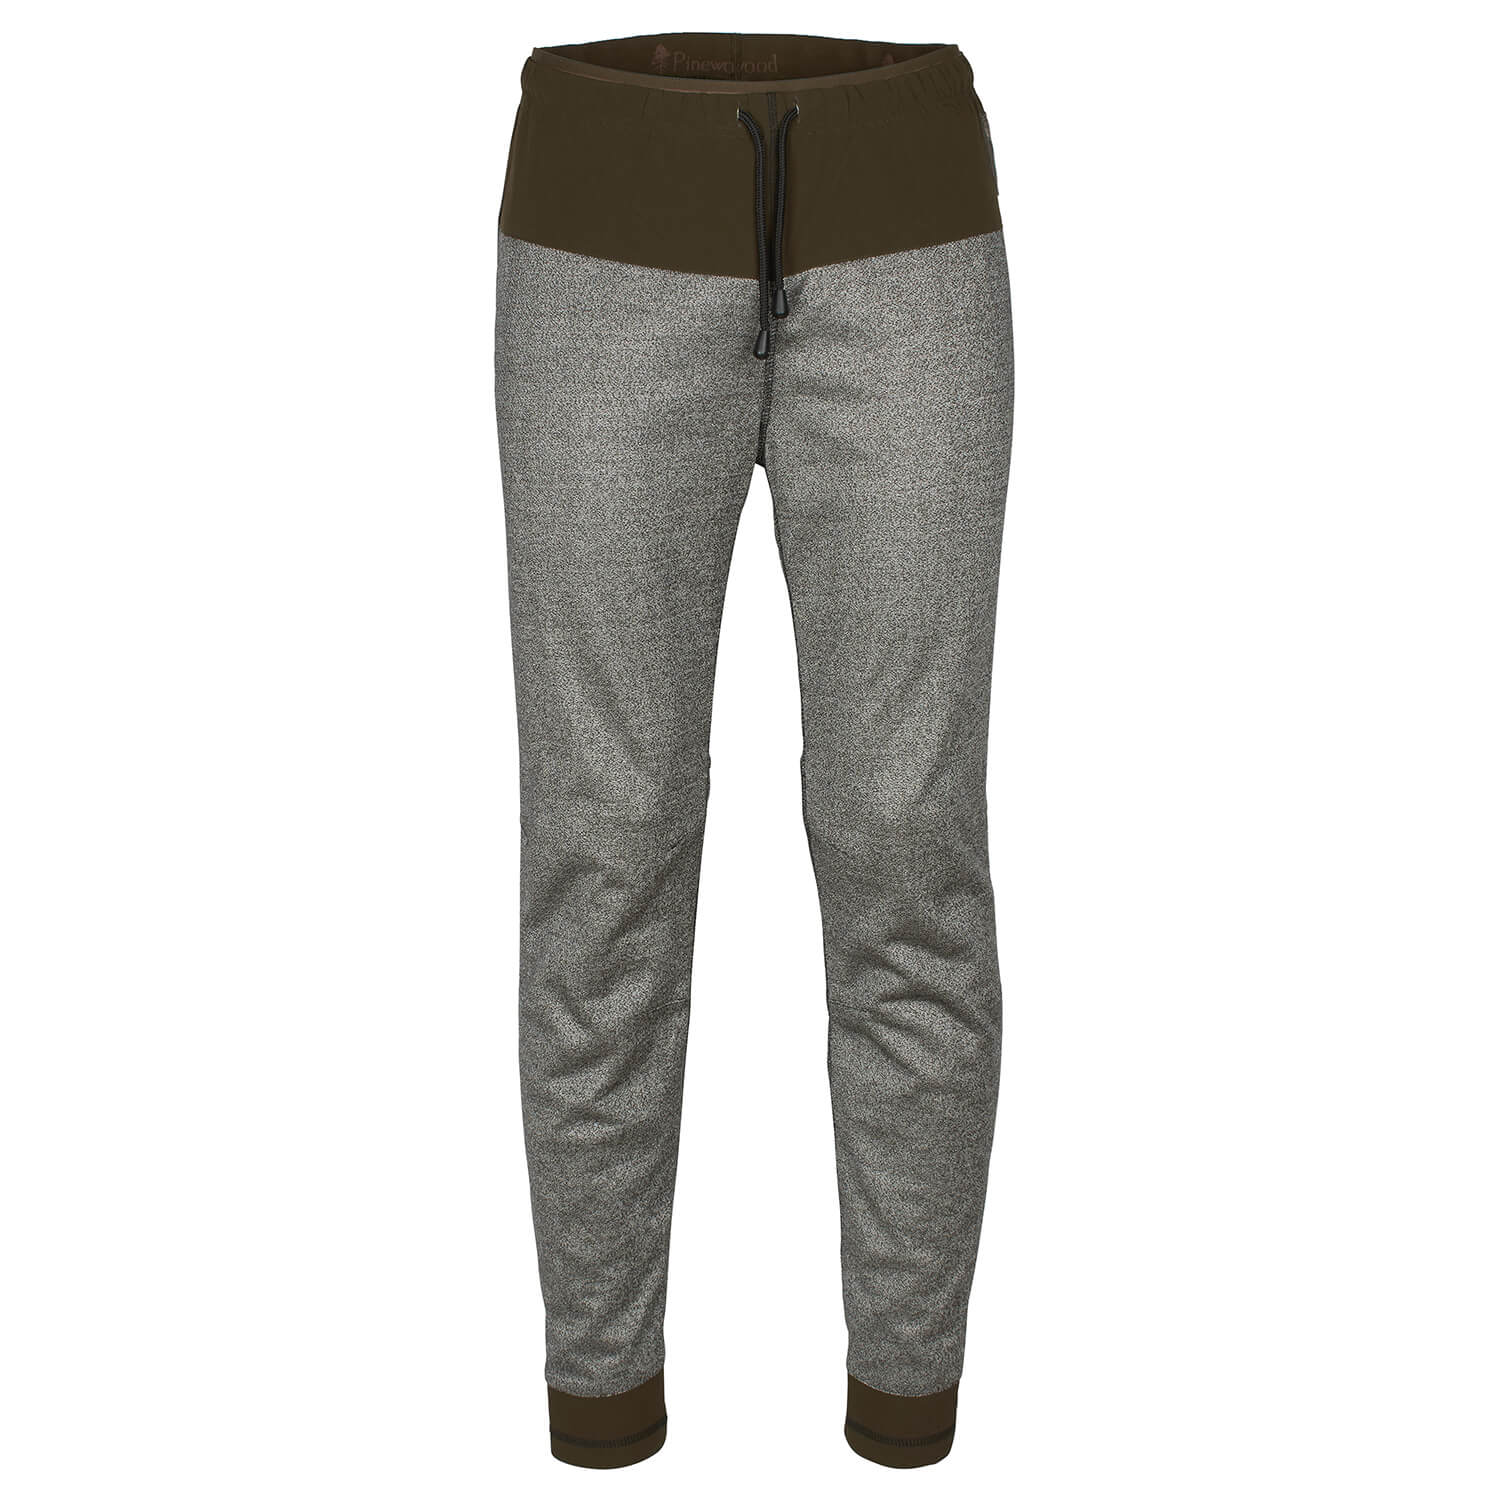 Pinewood Long Johns Wildboar Protect - Hunting Trousers